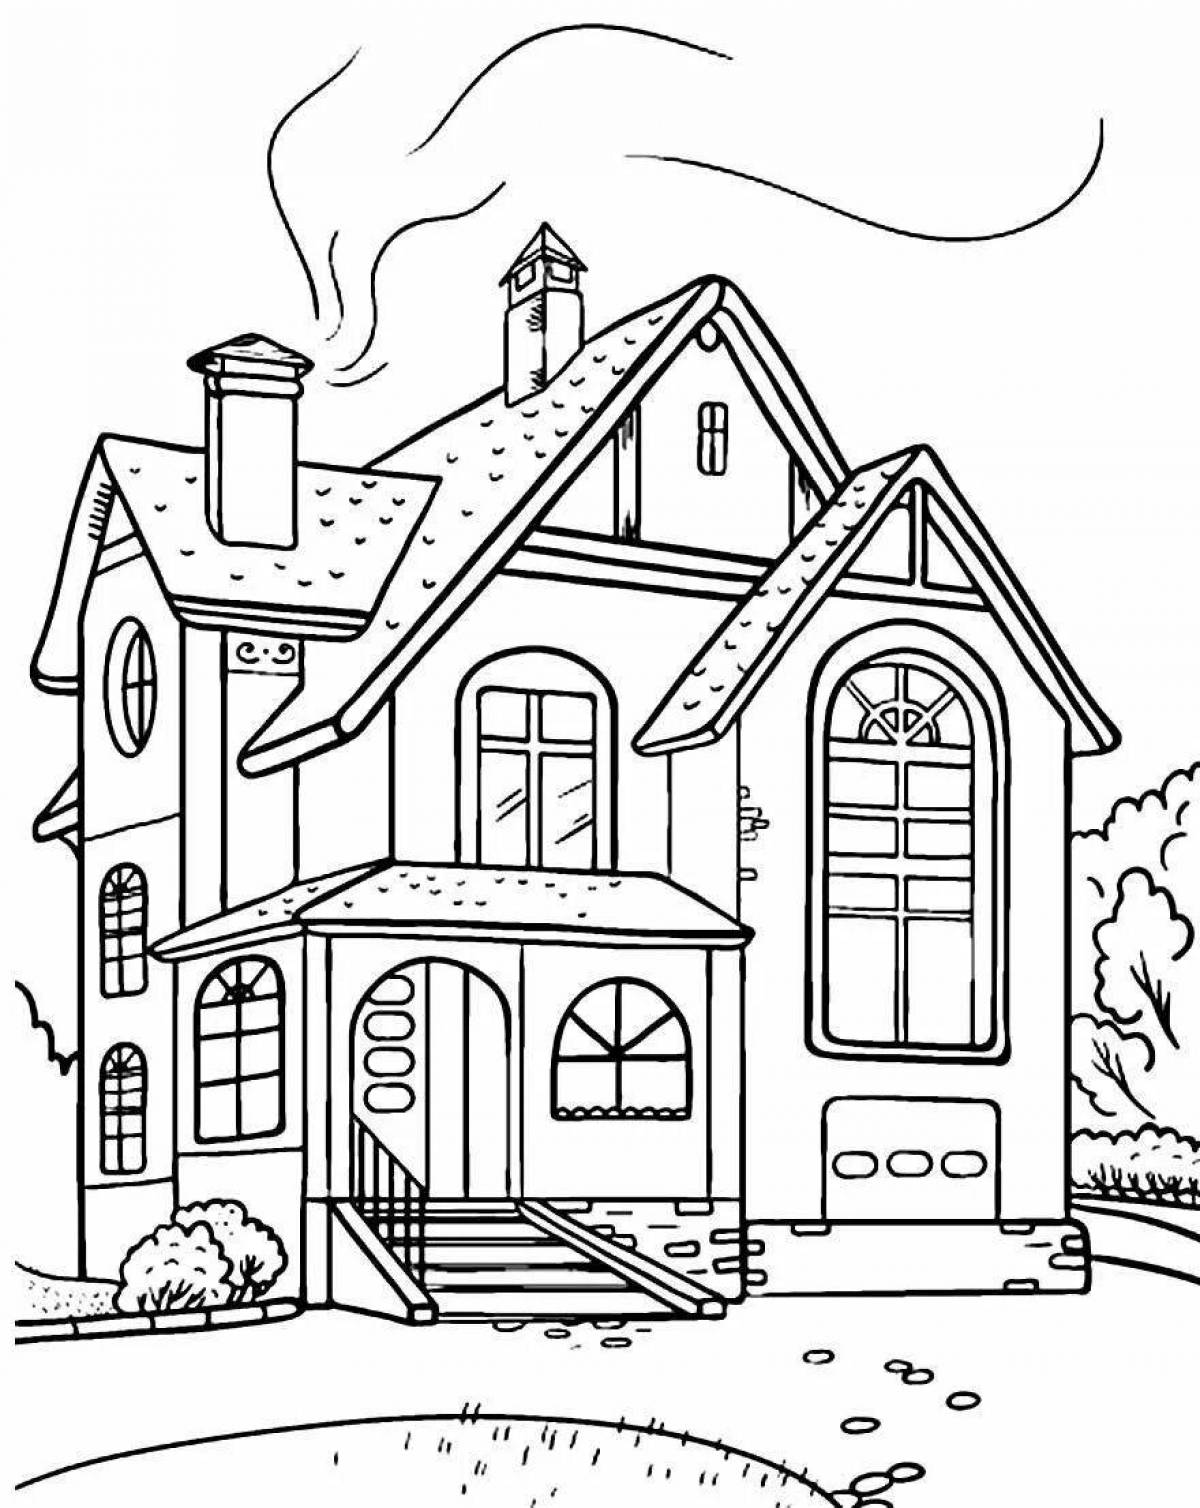 Coloring book of an elegant two-storey house